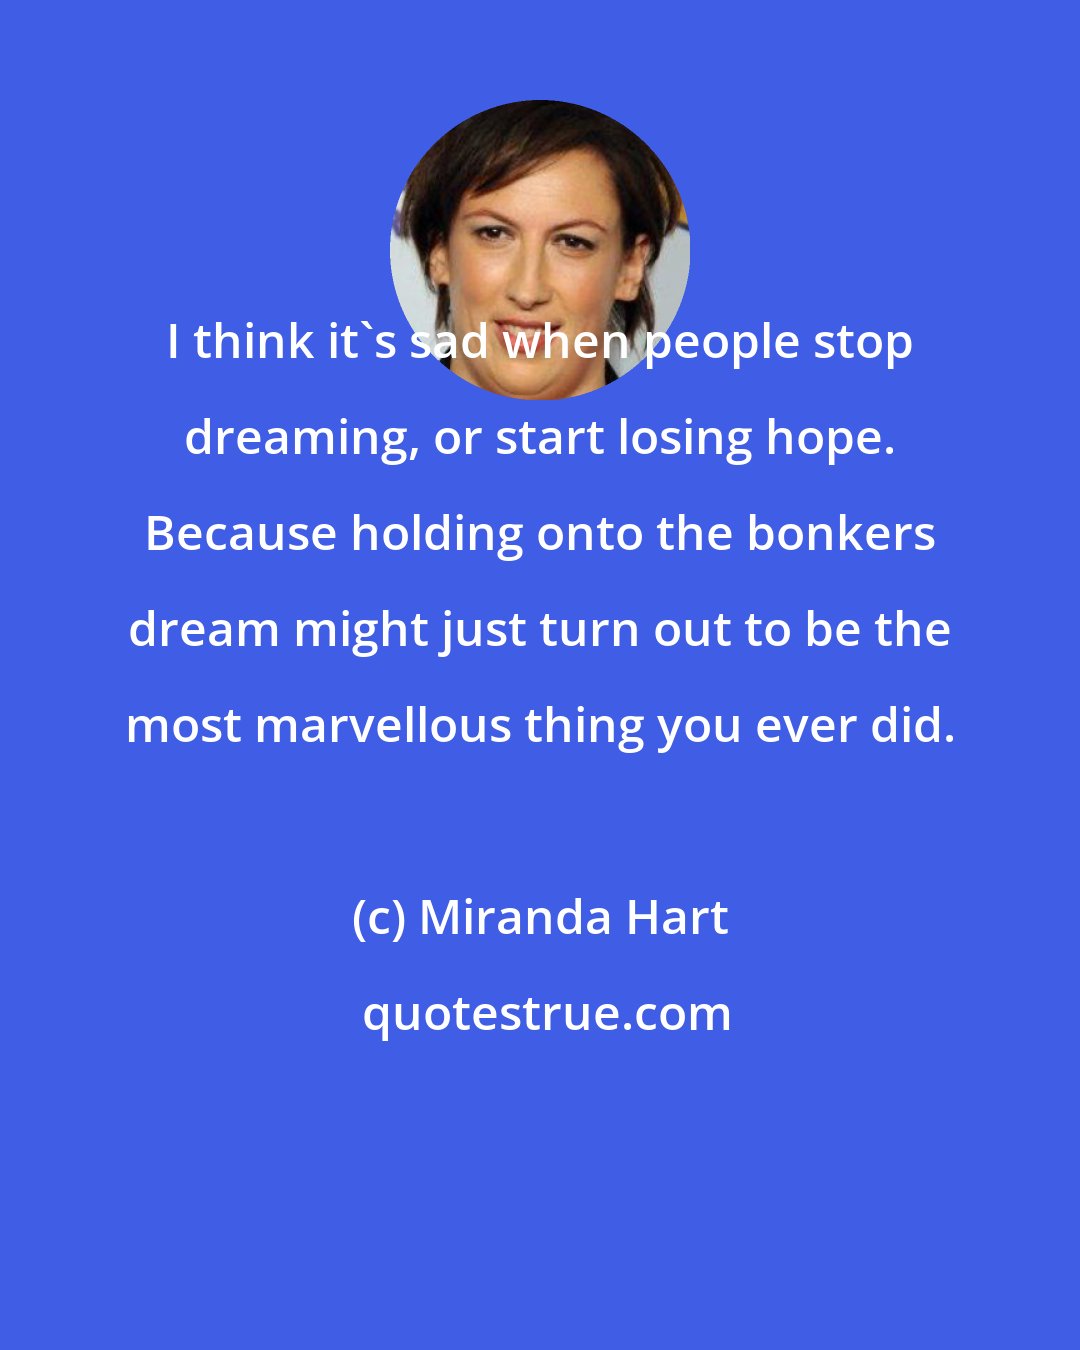 Miranda Hart: I think it's sad when people stop dreaming, or start losing hope. Because holding onto the bonkers dream might just turn out to be the most marvellous thing you ever did.